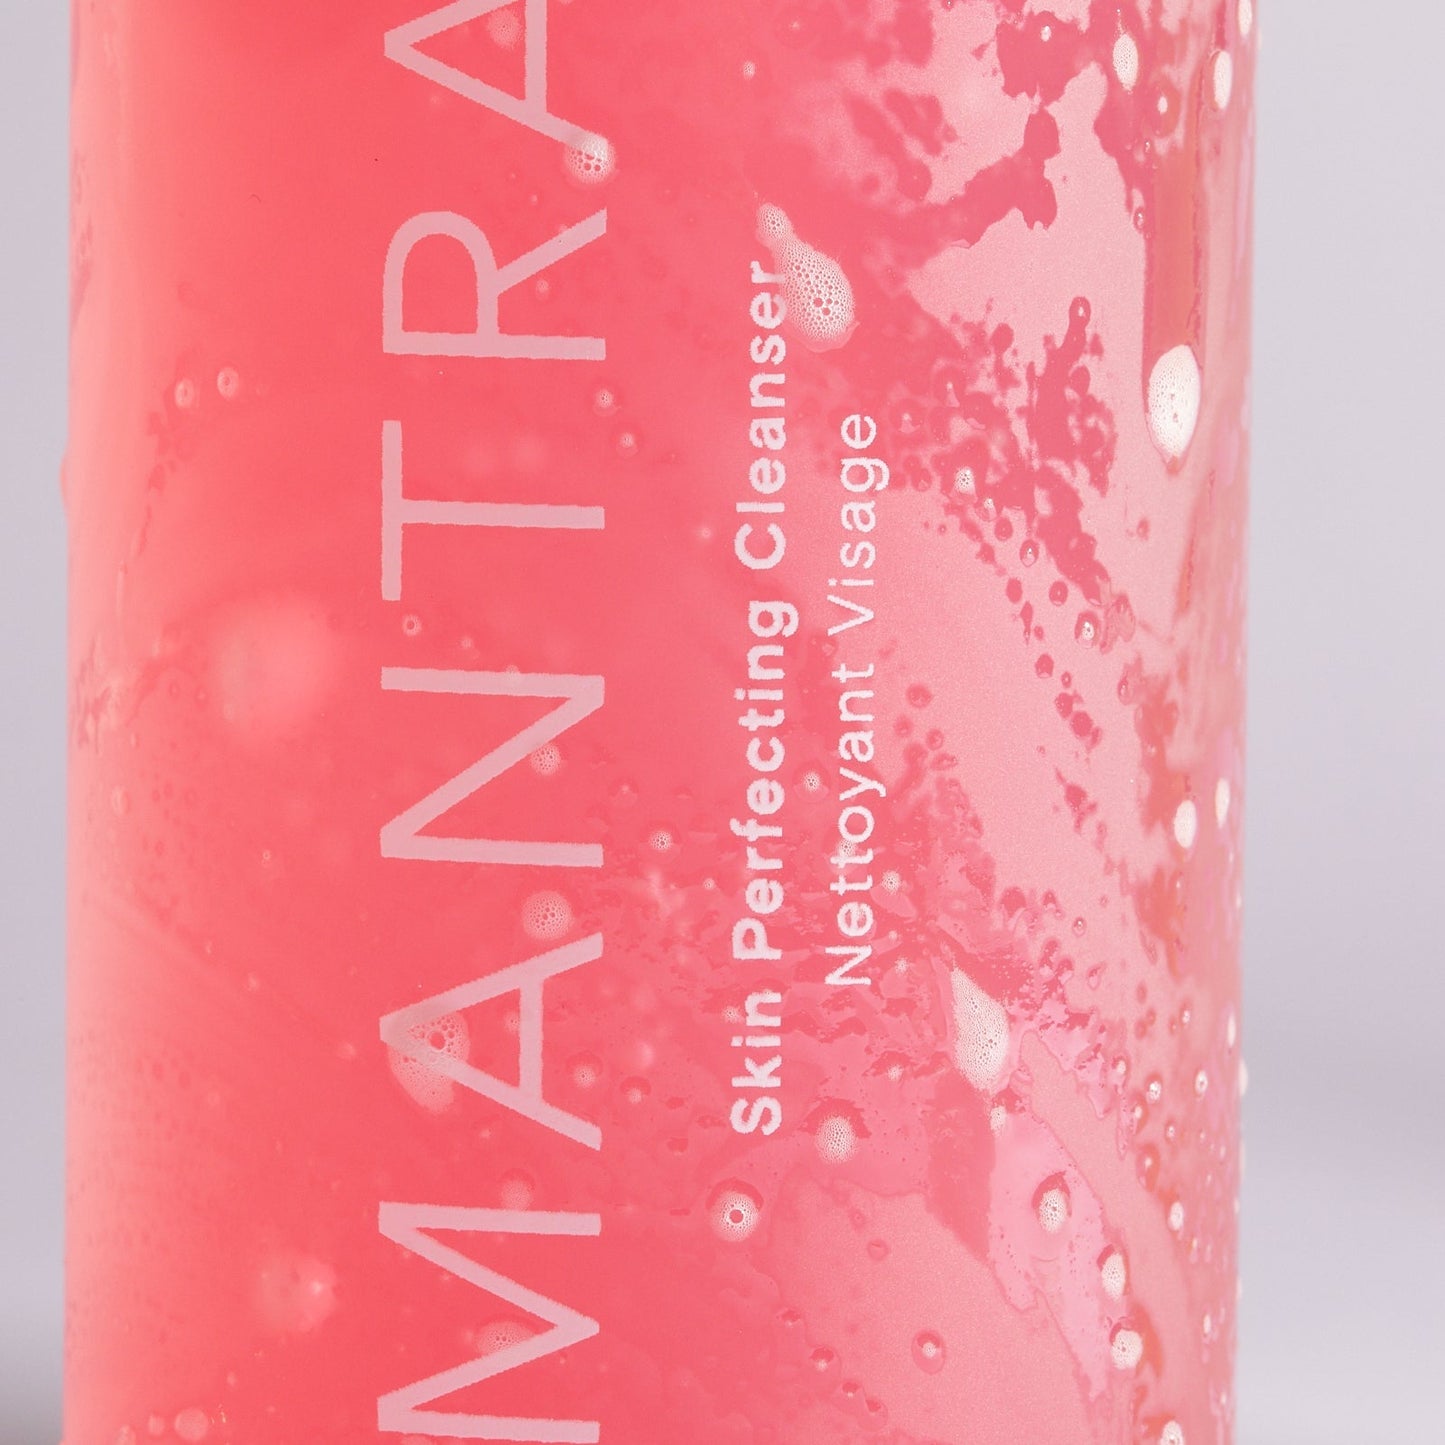 Mantra | Skin Perfecting Cleanser